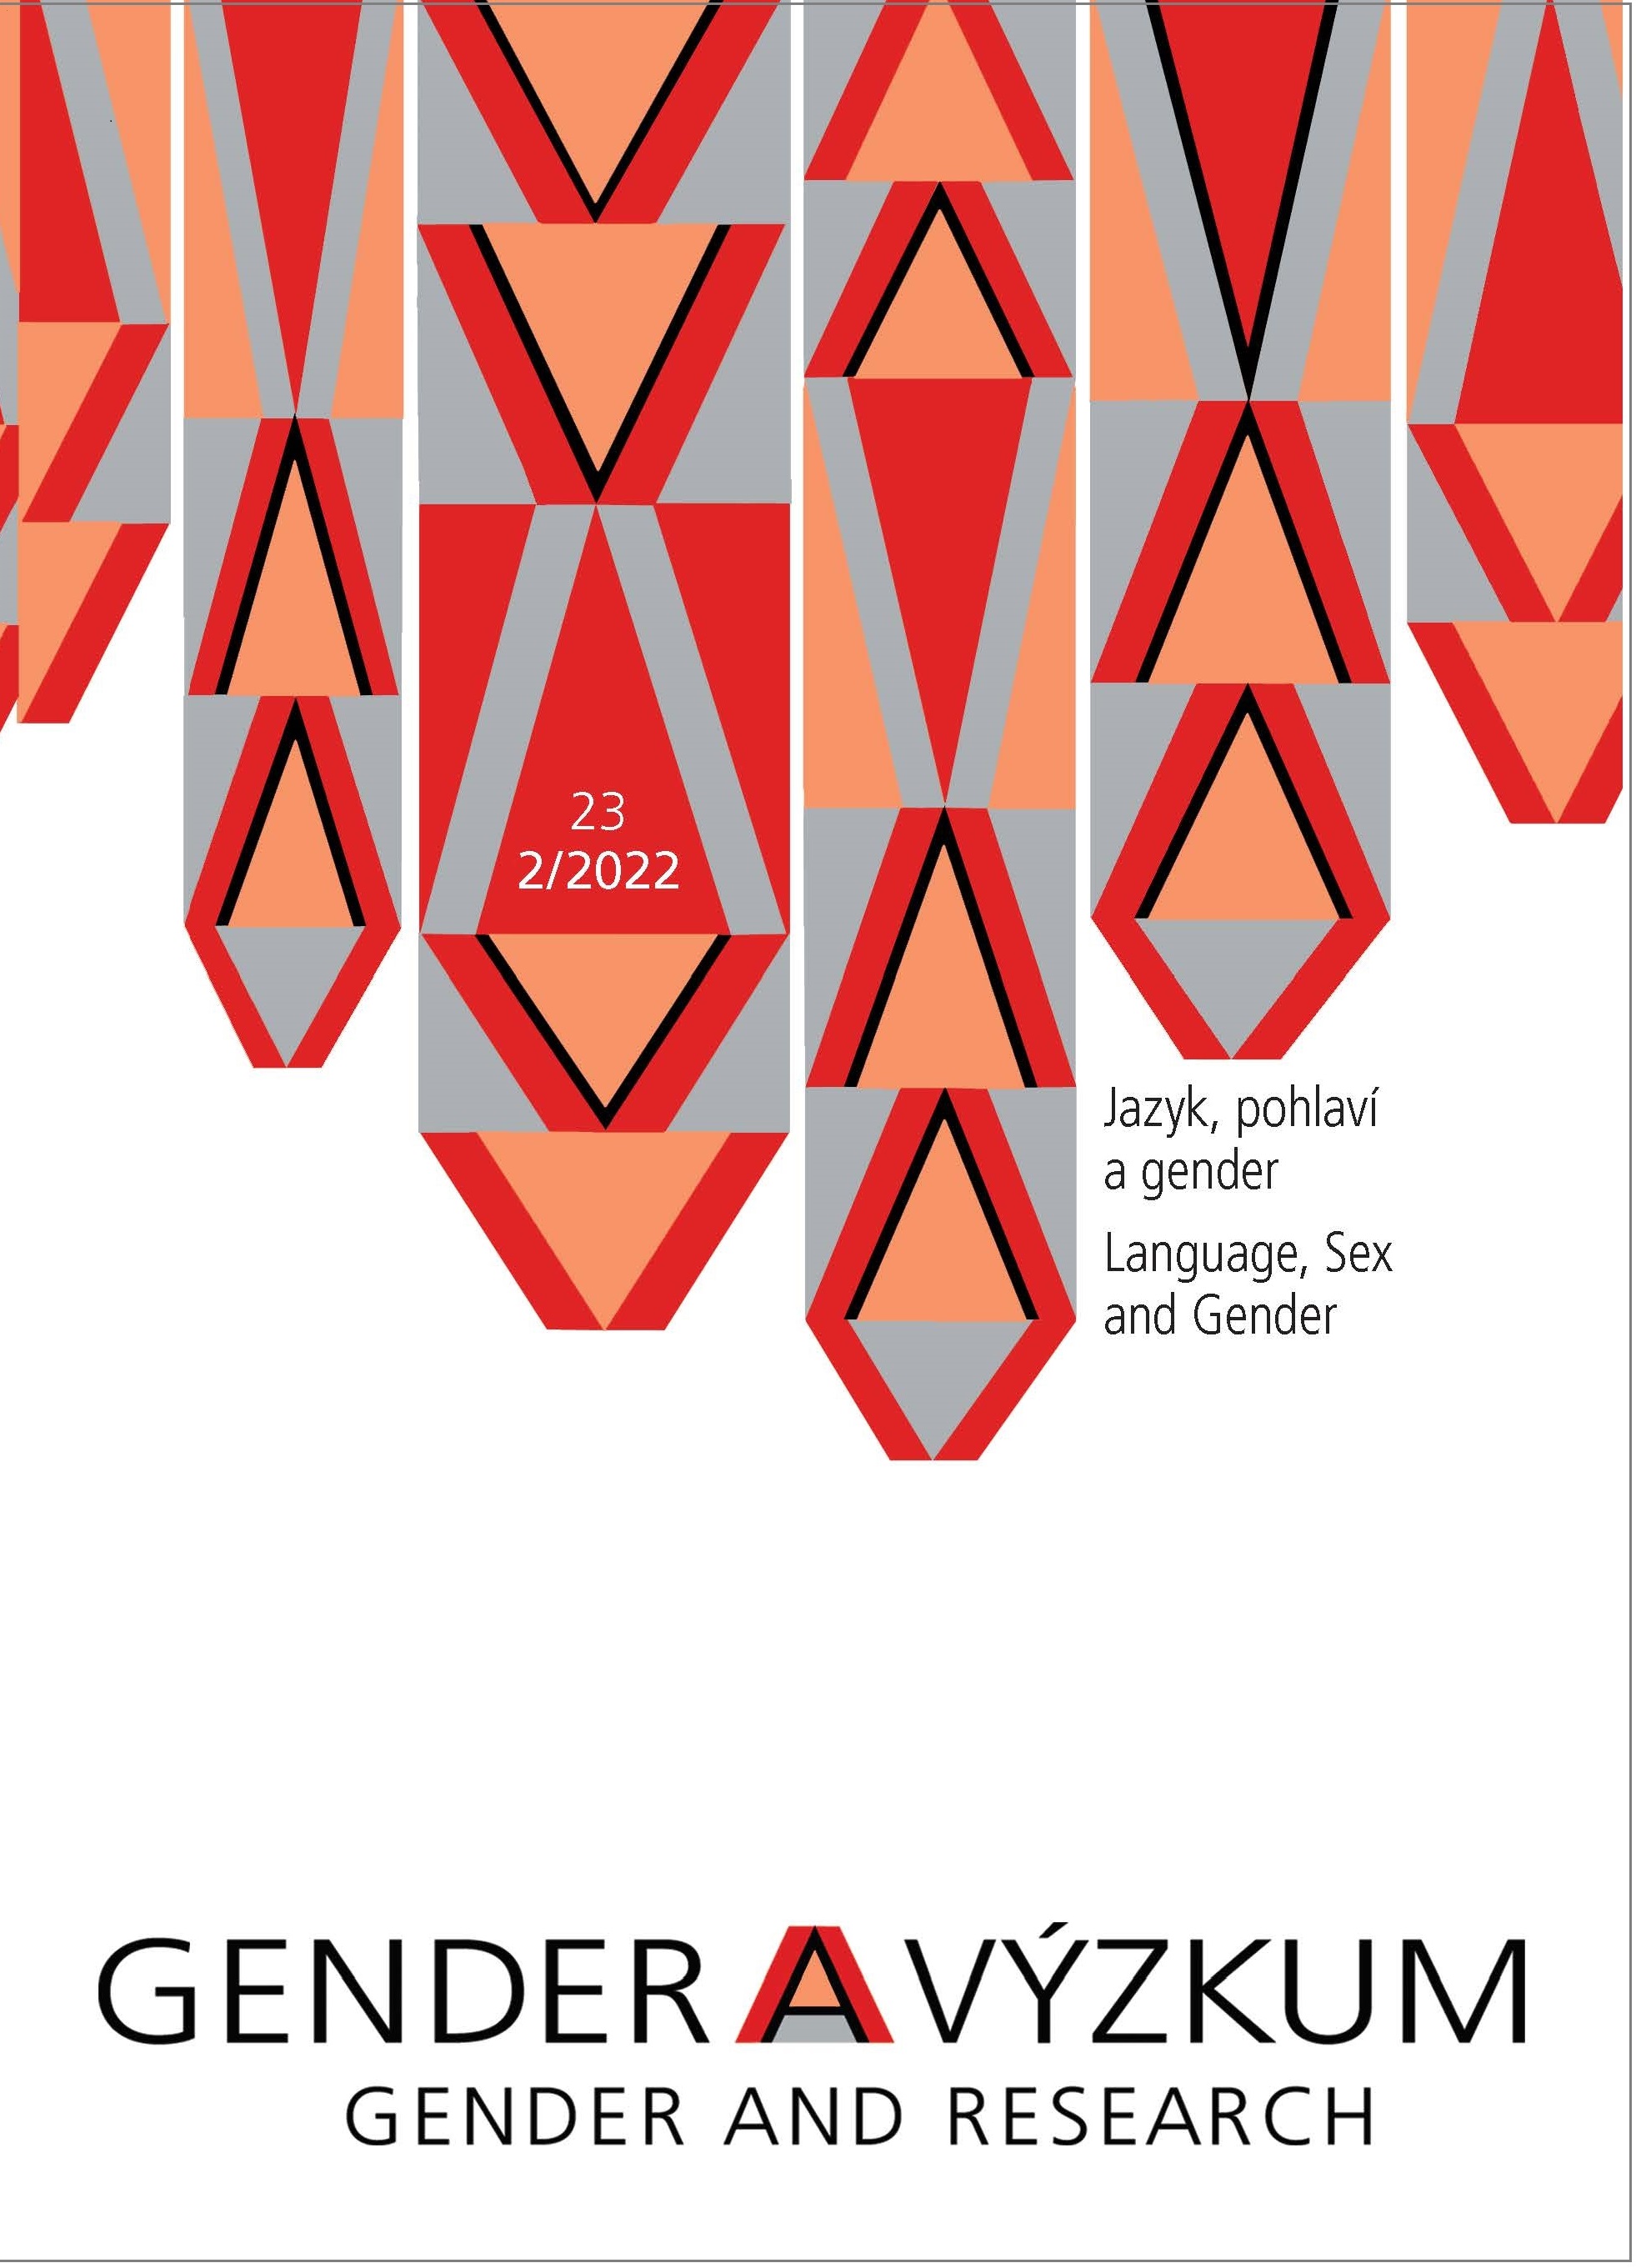 Corpus-Linguistic Analysis of Speech Communities on Anti-Gender Discourse in Slovene Cover Image